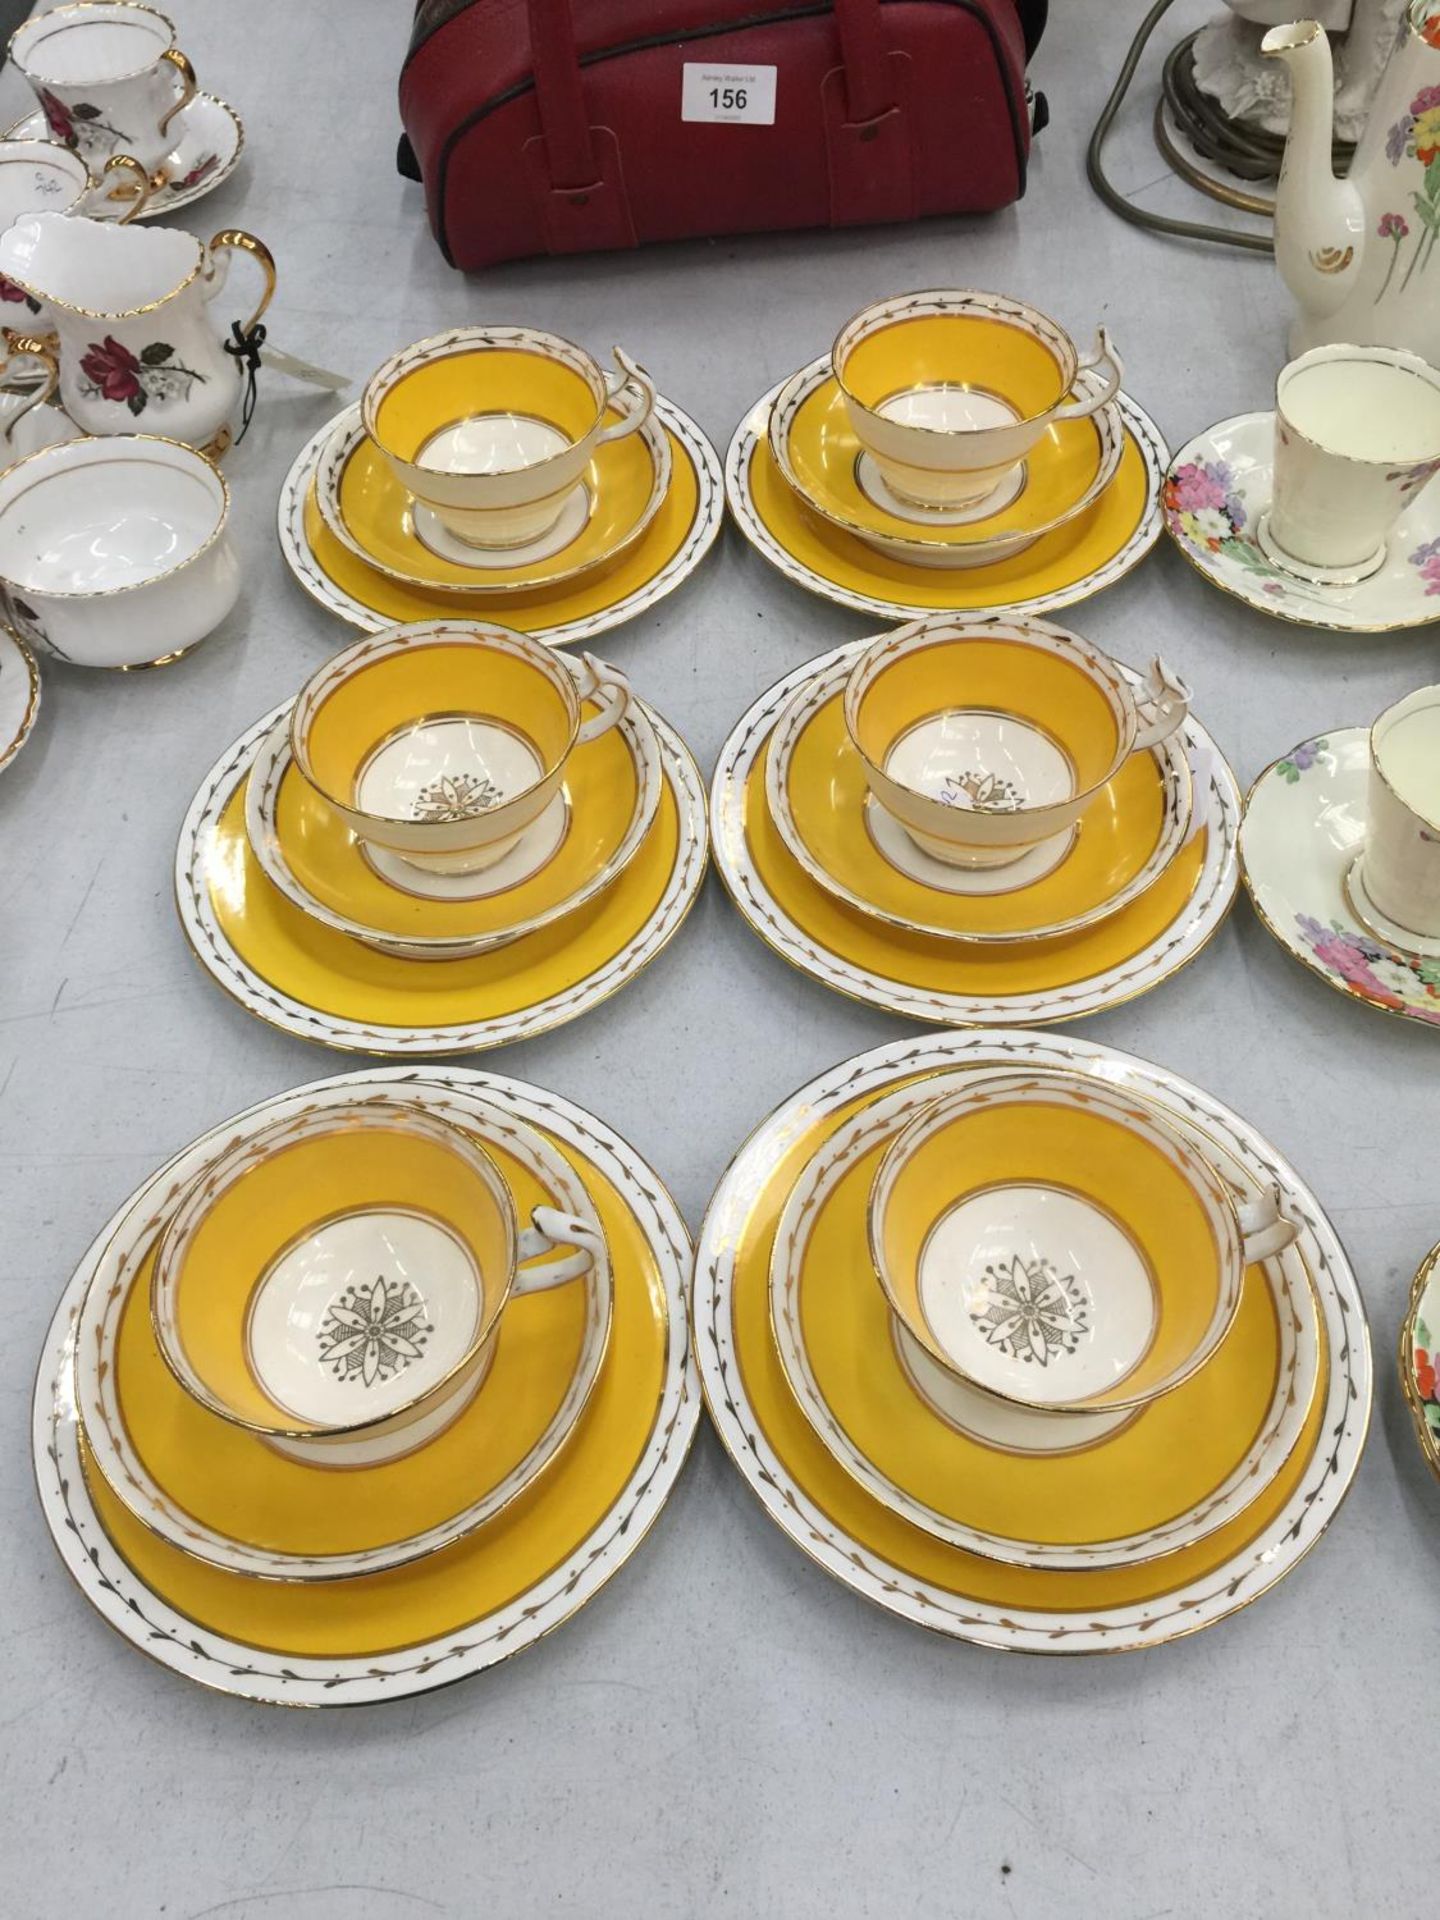 A QUANTITY OF WETLEY CHINA CUPS, SAUCERS AND PLATES IN A VIBRANT YELLOW AND GUILD COLOUR